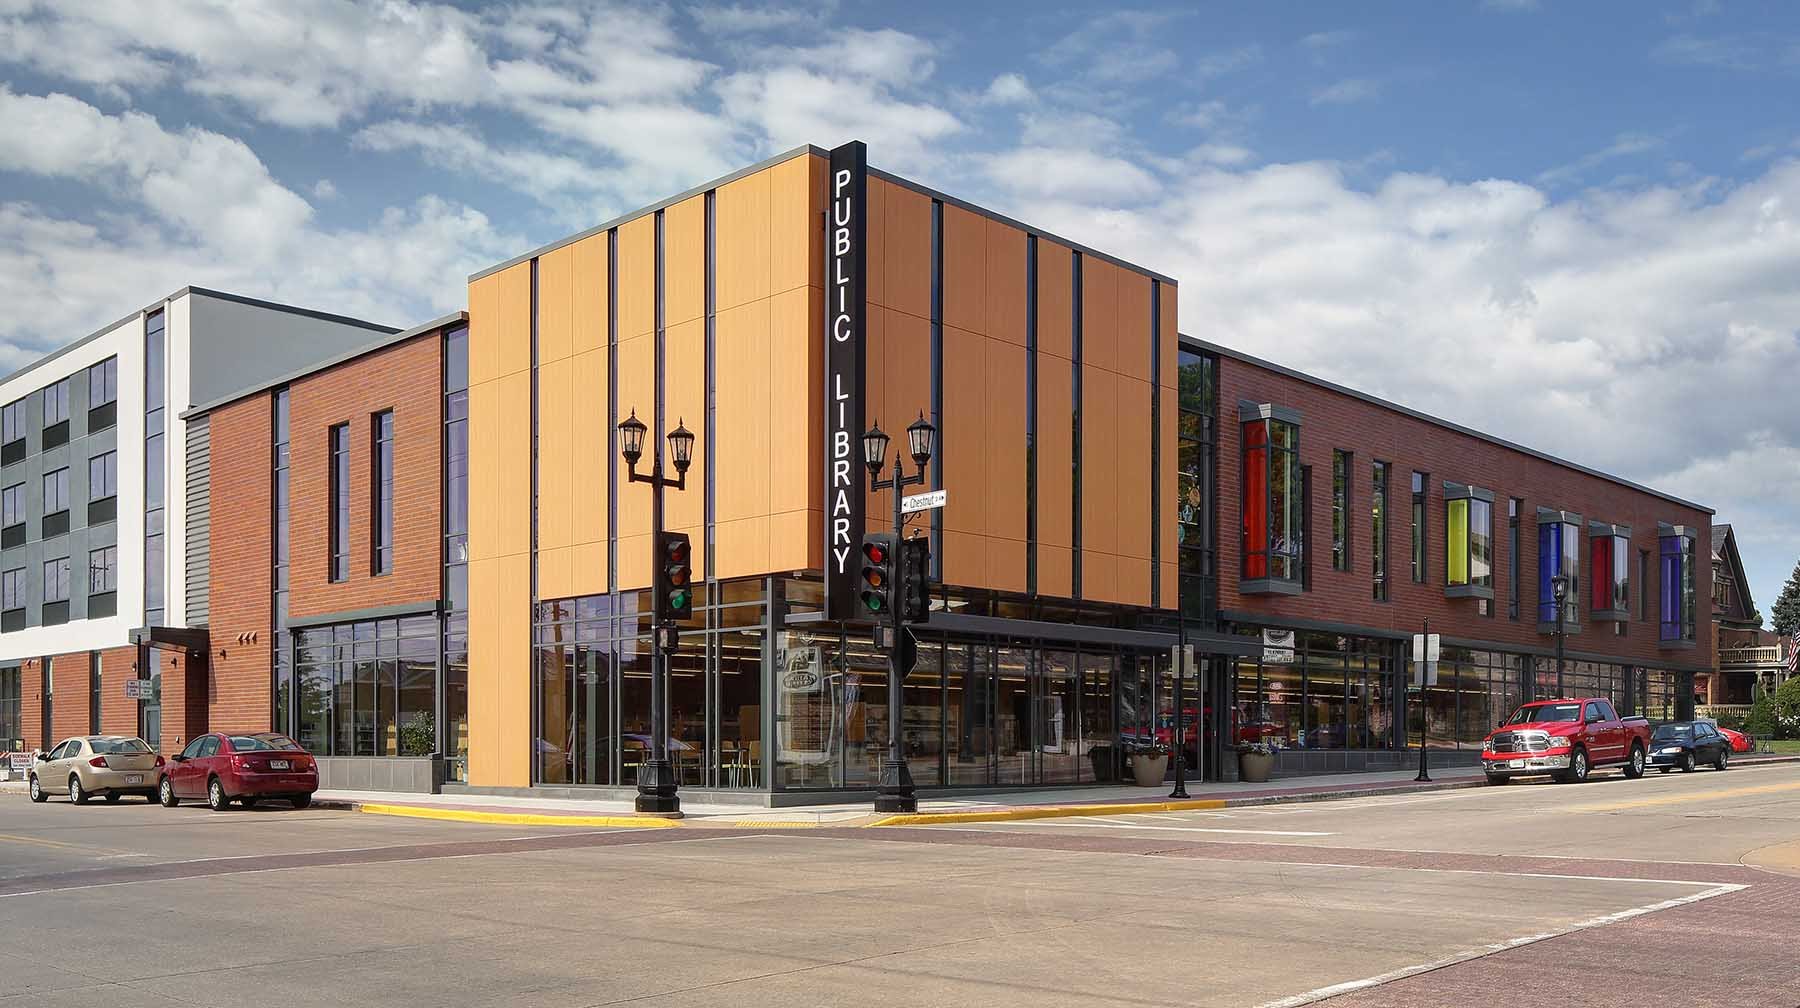 The city of Platteville retained PRA to design a Public Library that acts as the cornerstone of the new whole city block development in the downtown area.